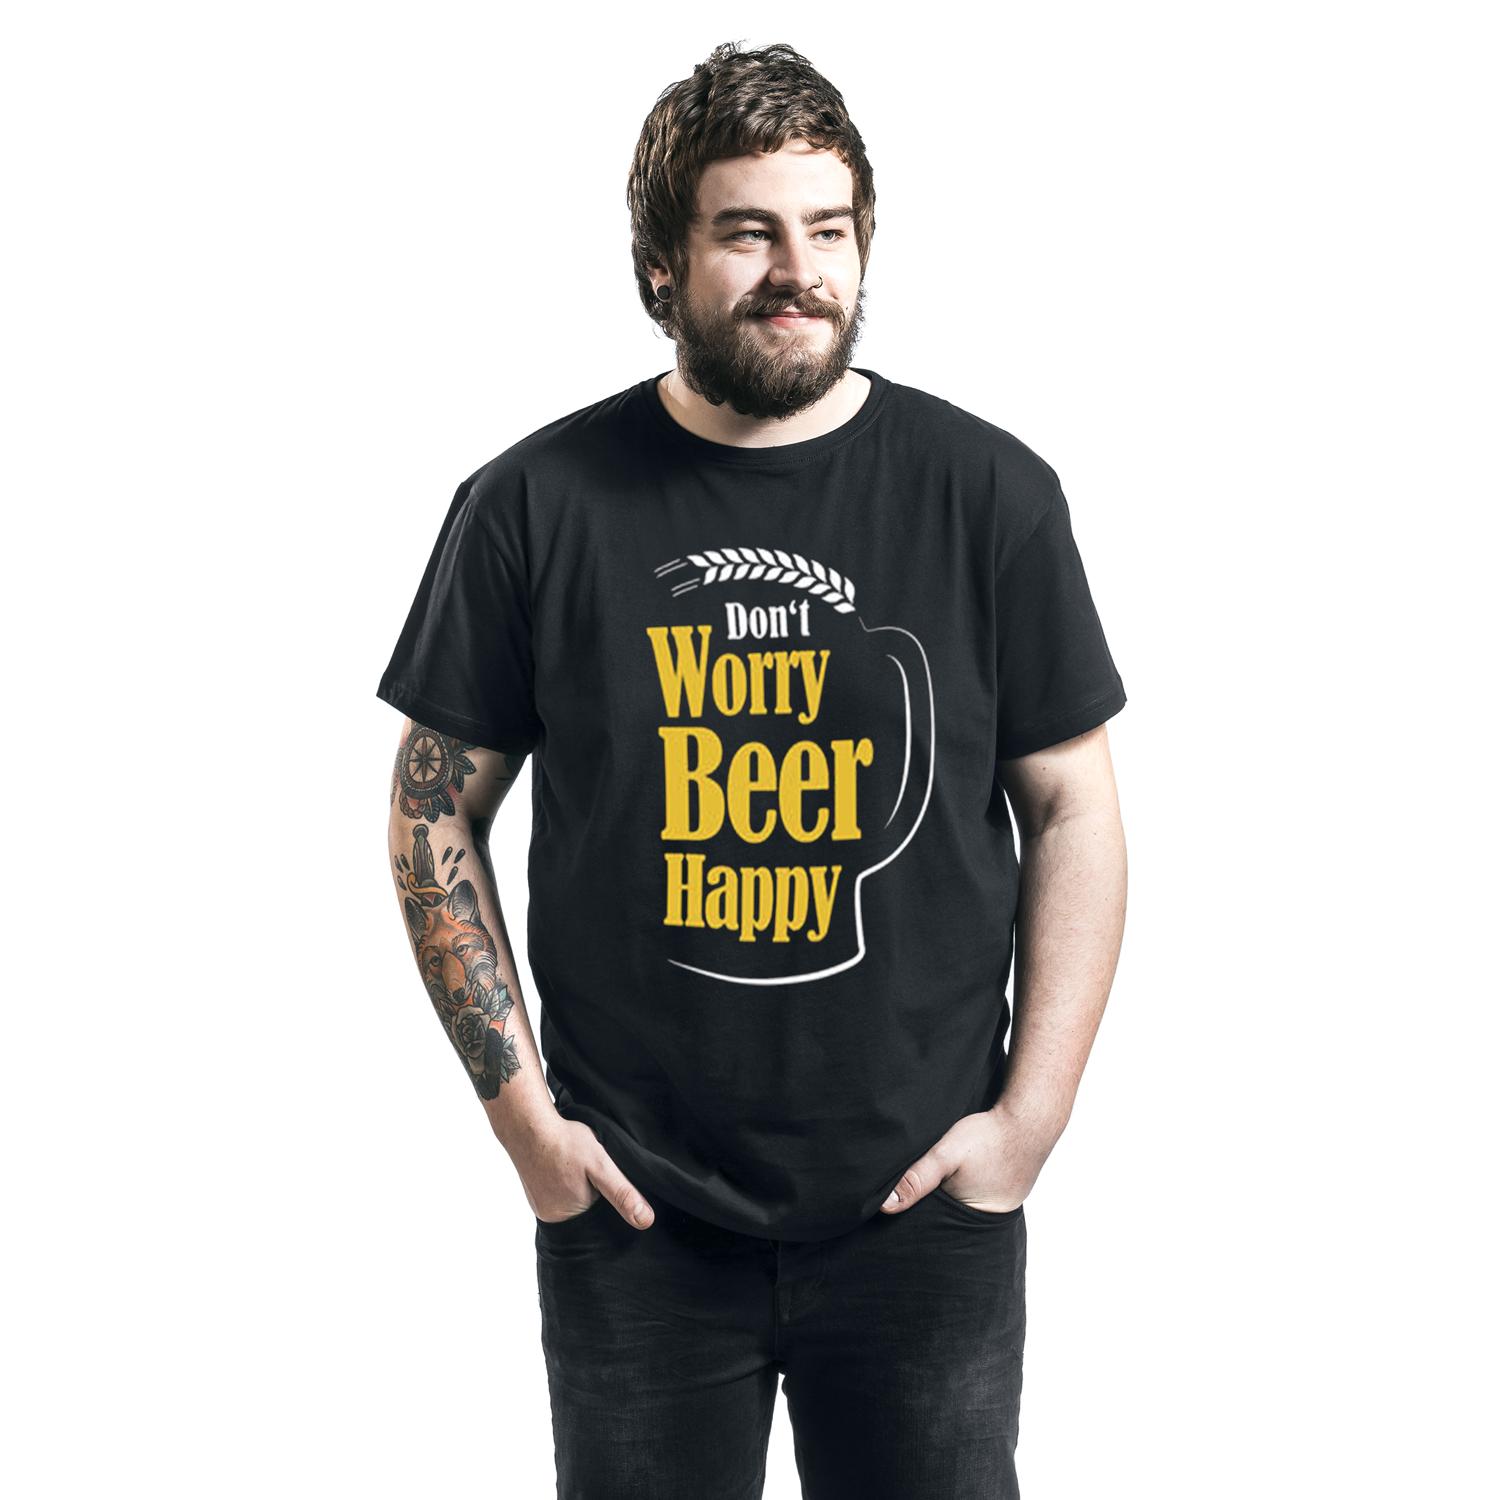 Don't Worry Beer Happy T-shirt Design man